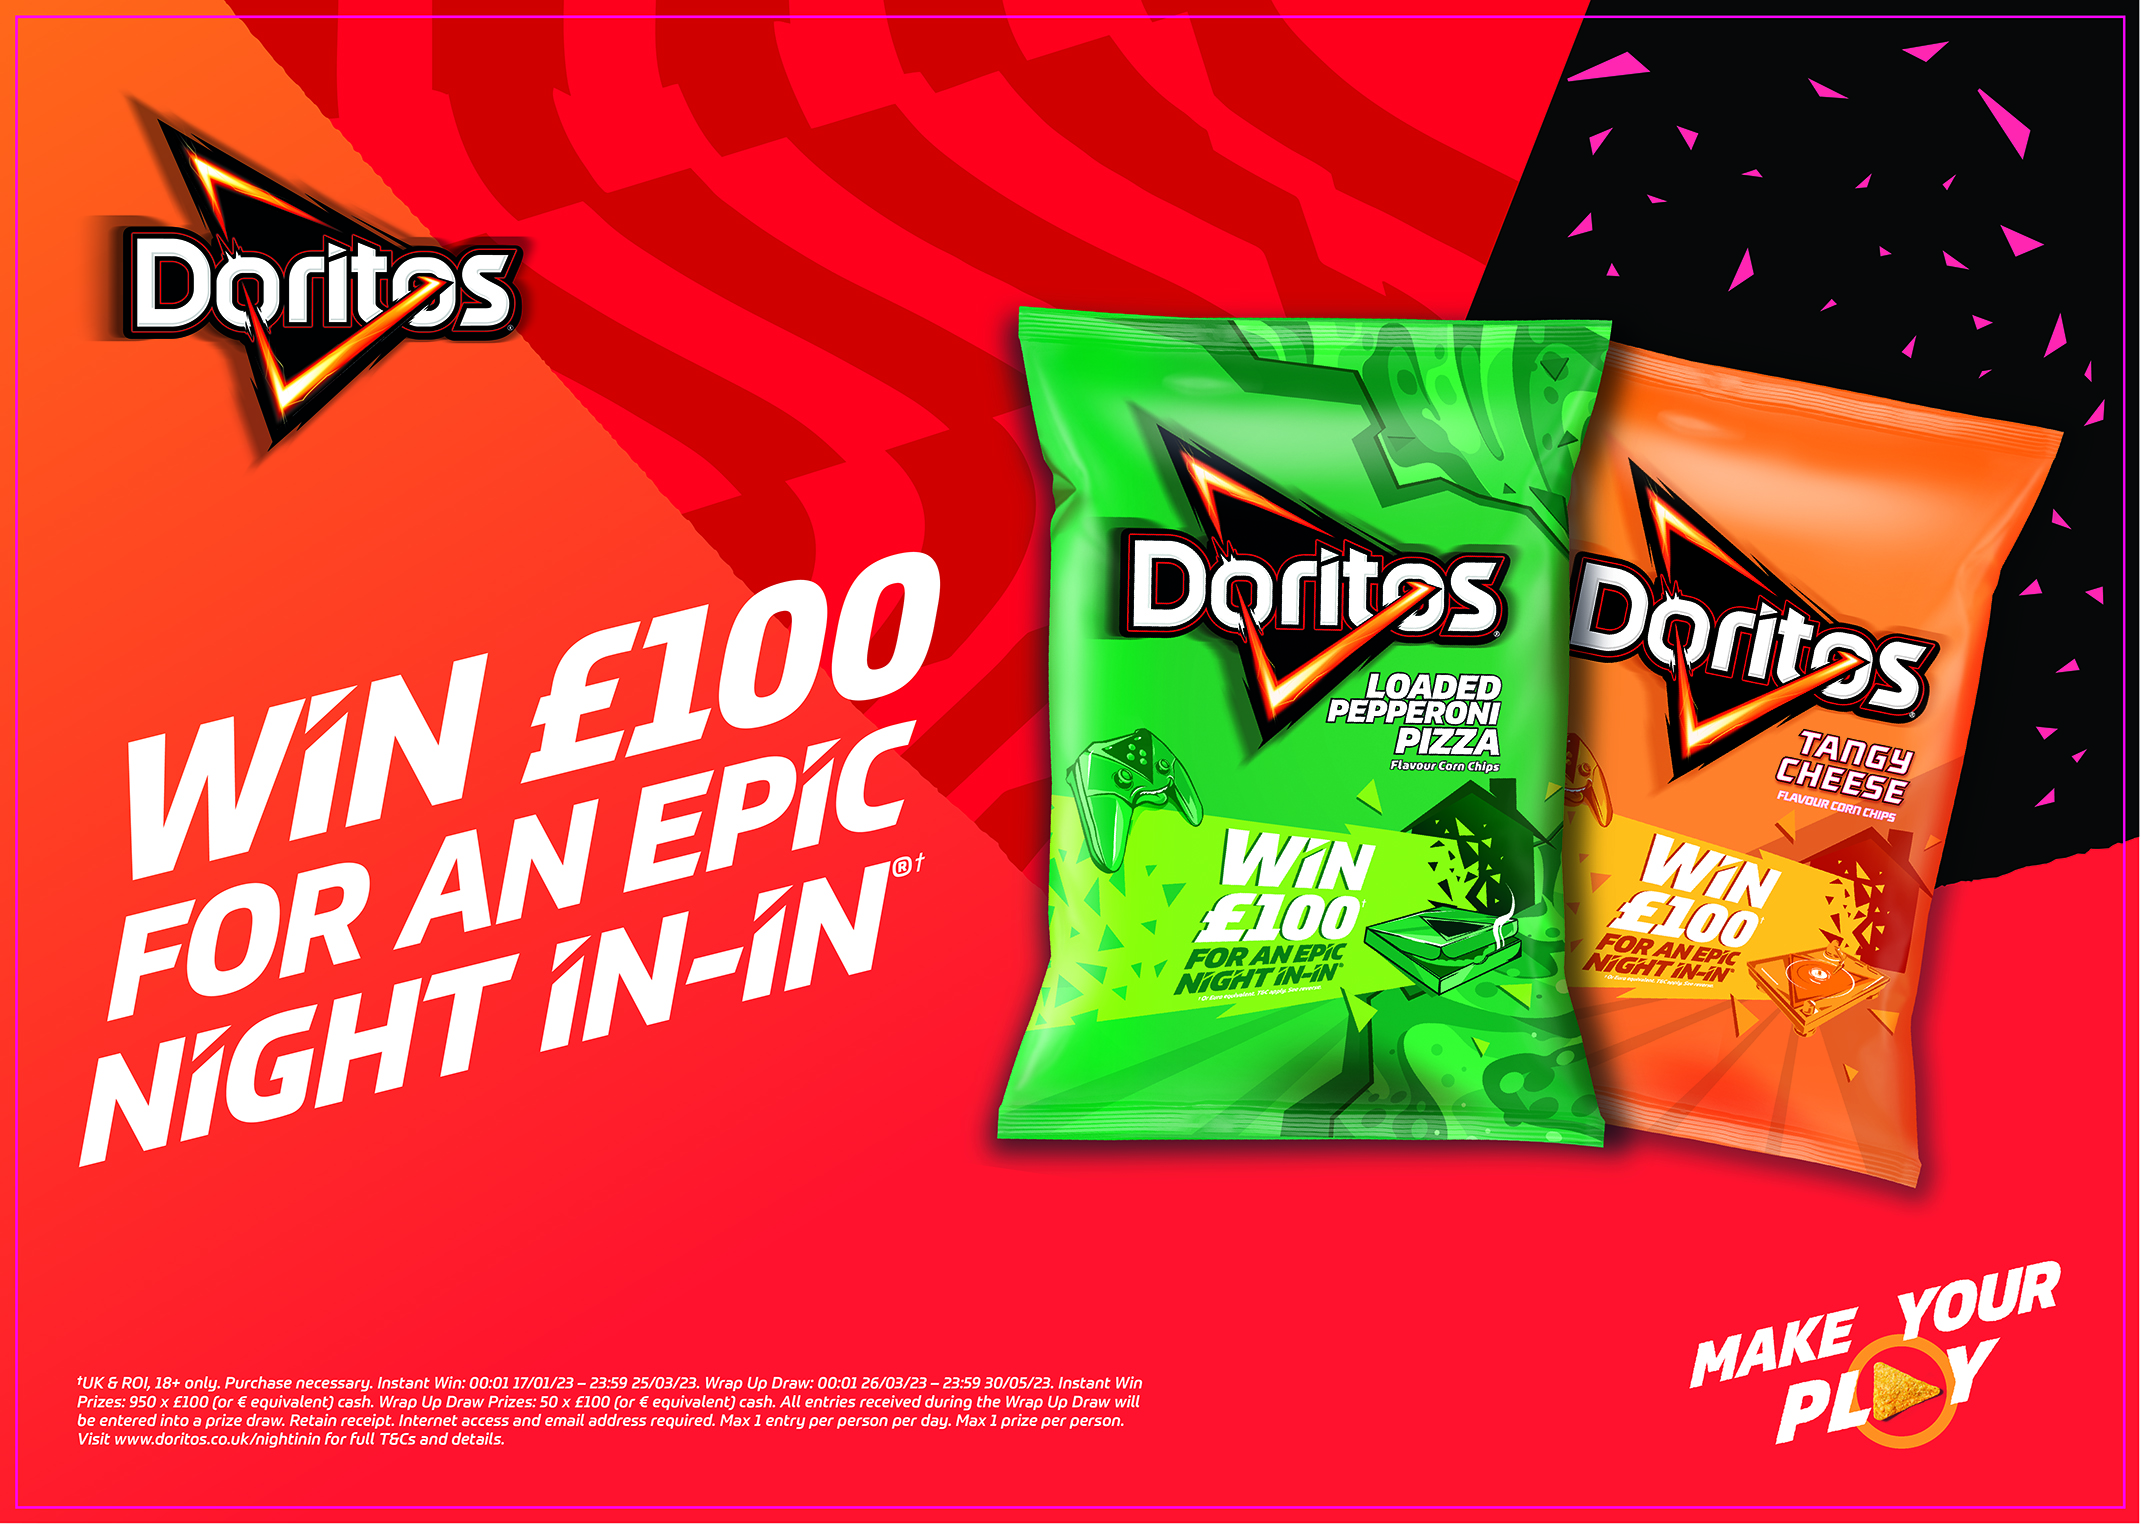 ‘Devour Doritos Your Own Way’ campaign includes on-pack and TV promos